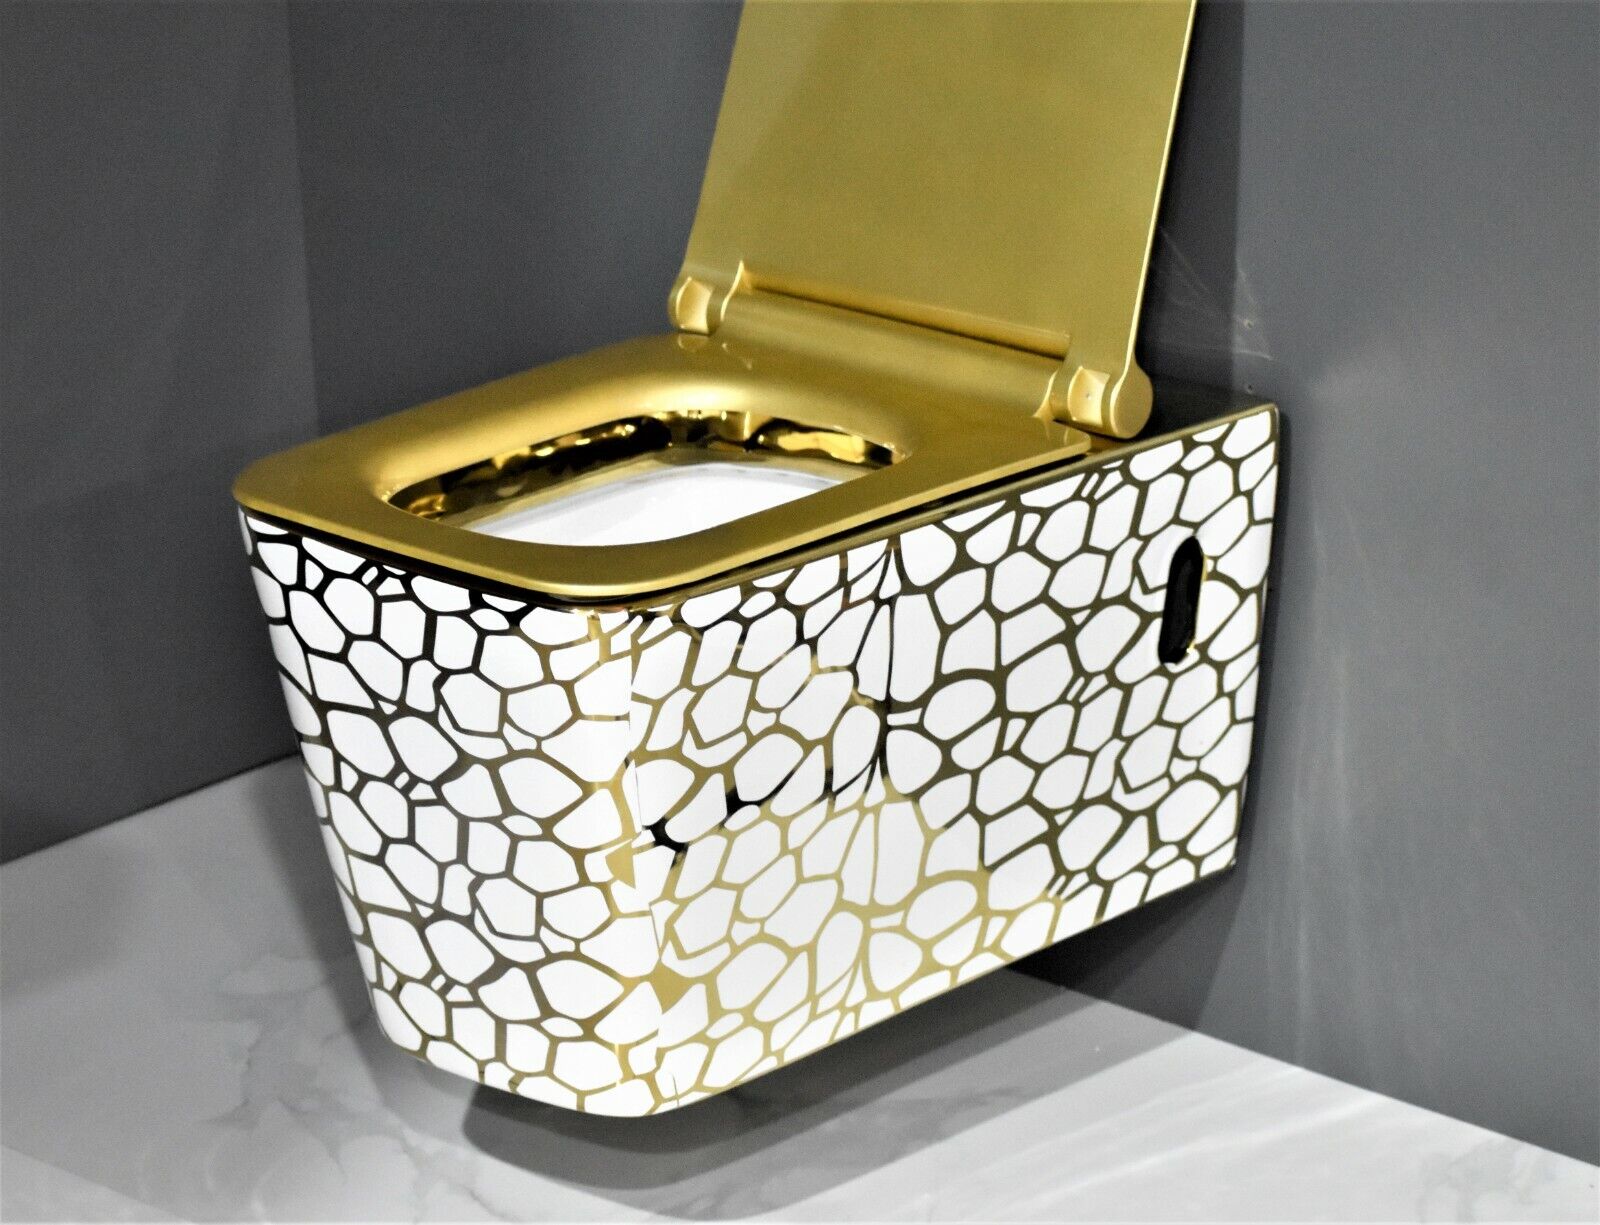 InArt Luxury Elongated Wall-Mount Toilet Rimless Flushing Ceramic - Seat Included in Gold Color - InArt-Studio-USA